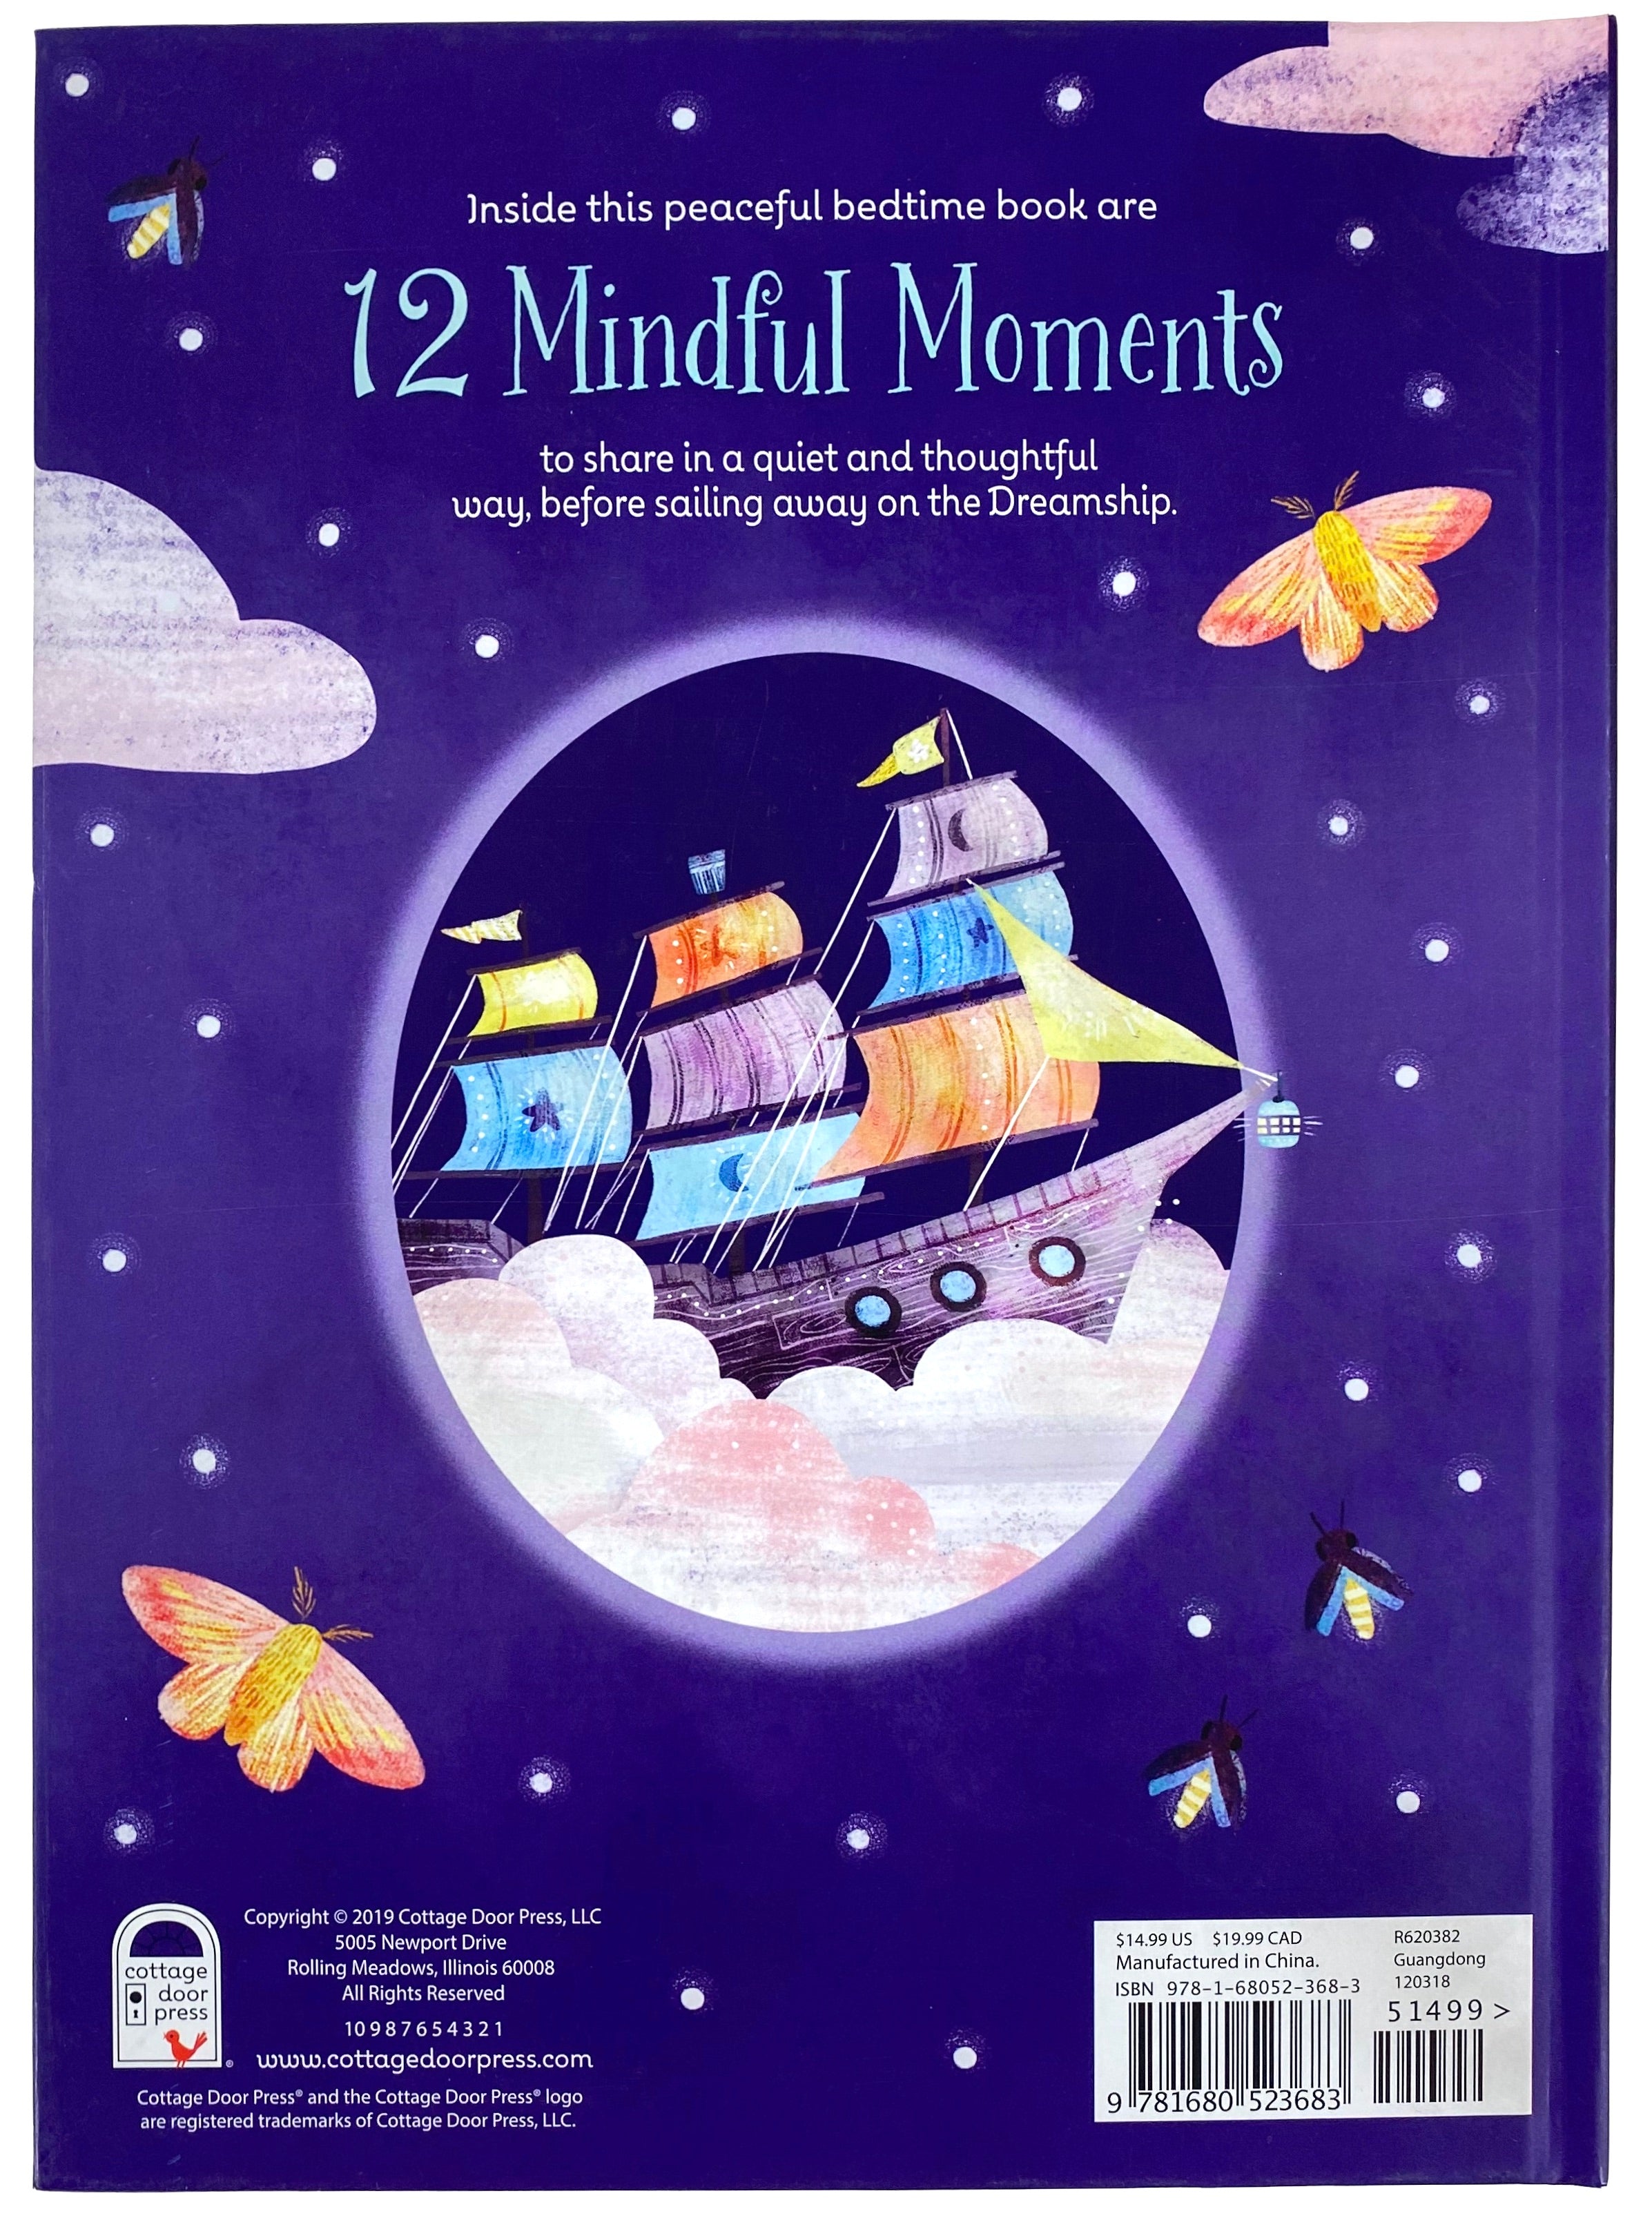 Mindful Moments at Bedtime    